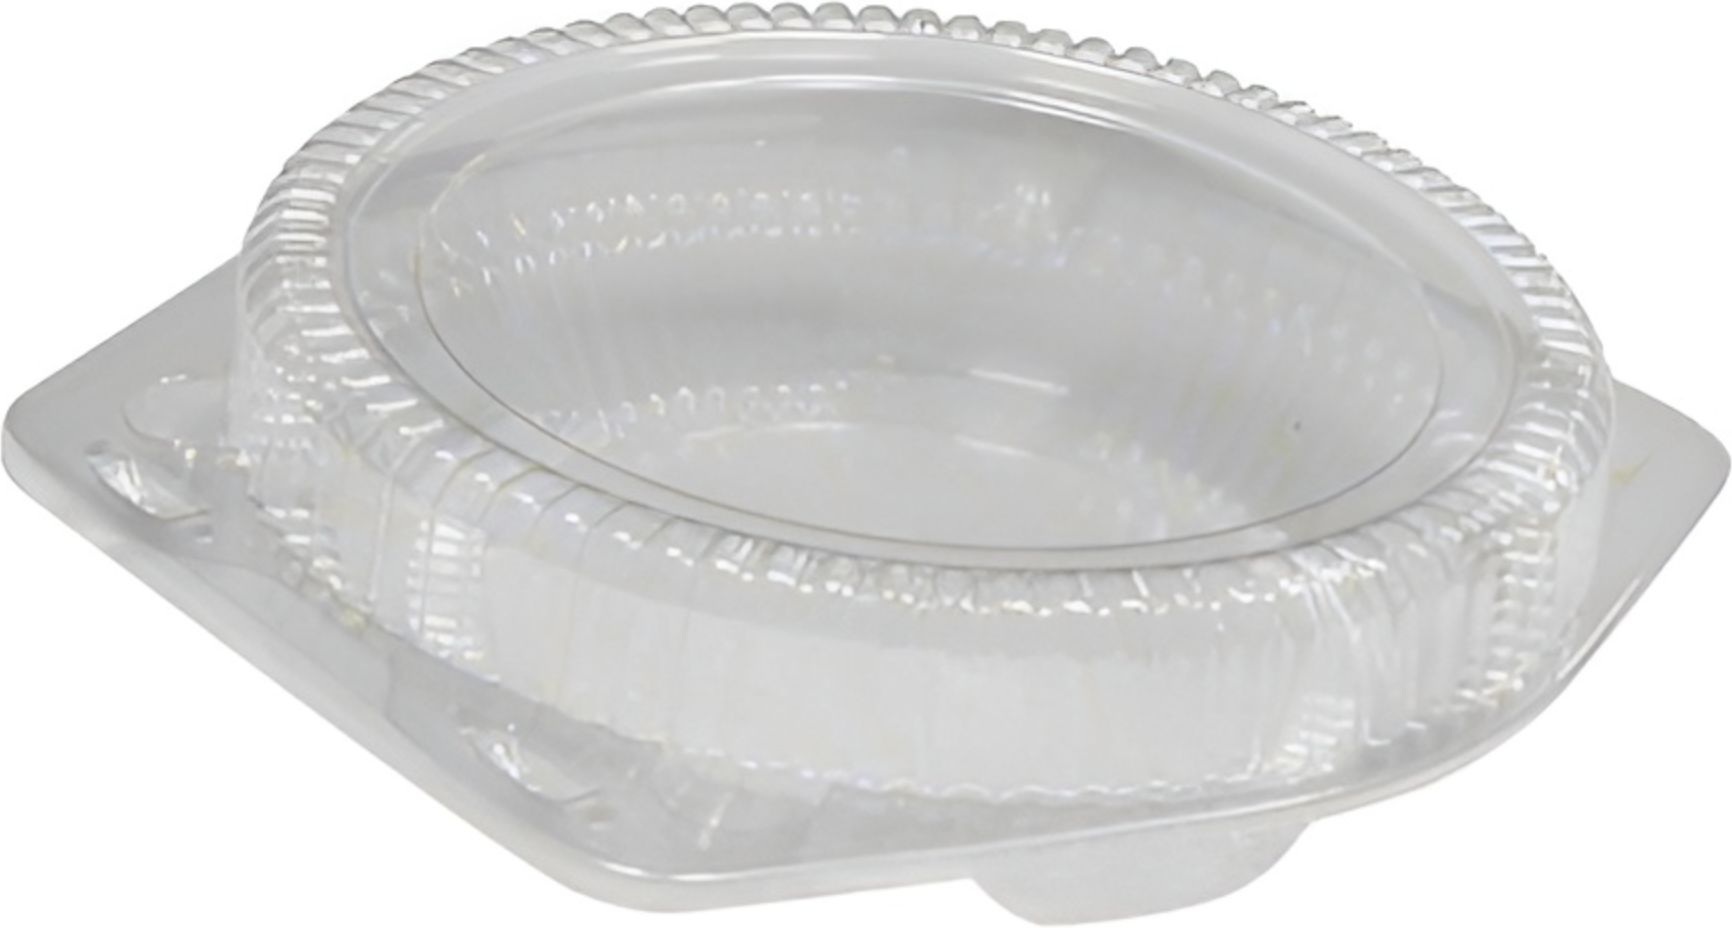 Detroit Forming - 9" Shallow Pie Plastic Hinged Container, 100/Cs - LBH-991